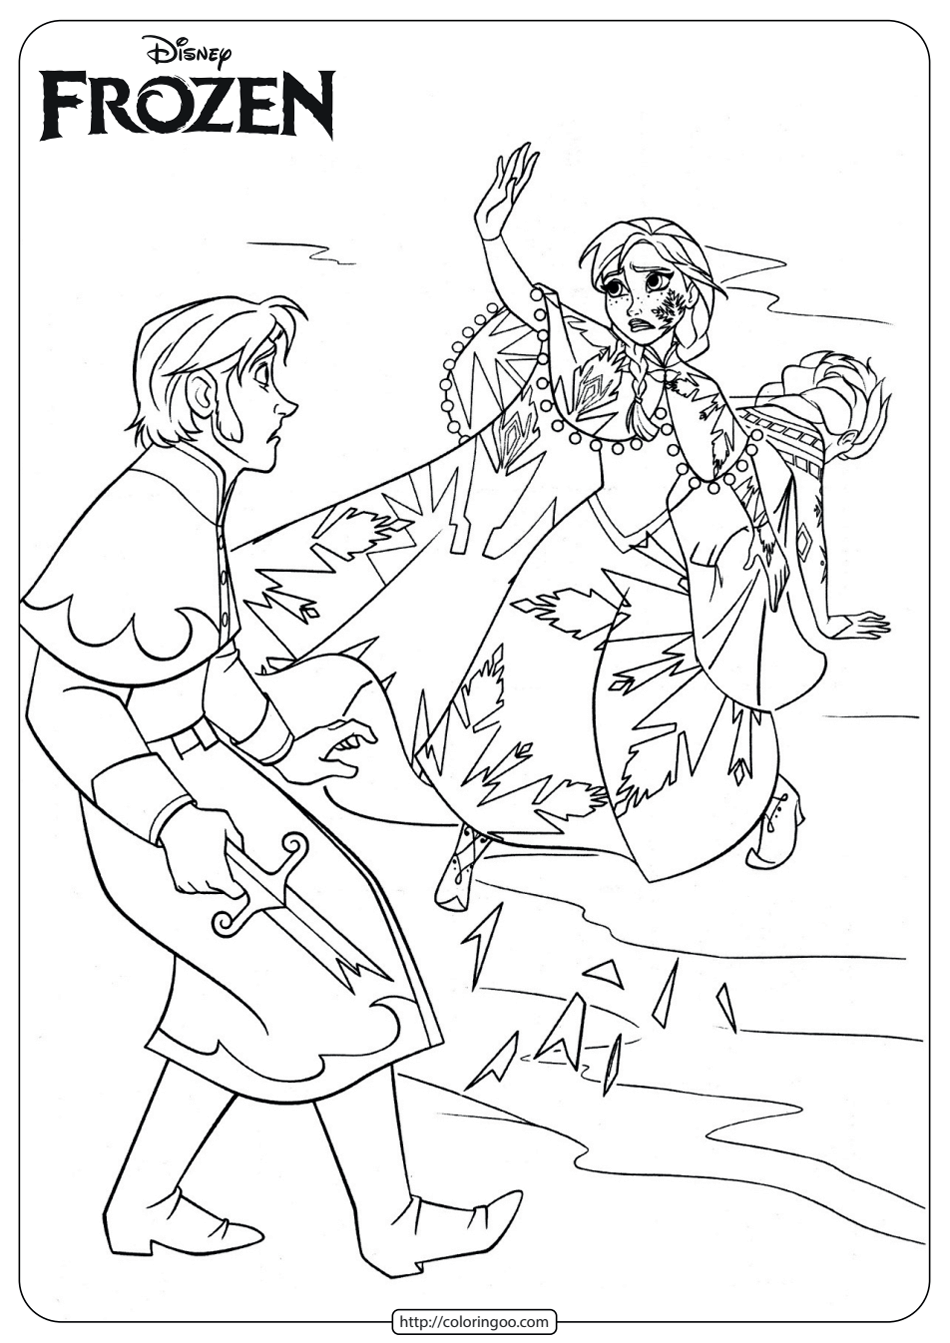 printable frozen anna hans coloring pages